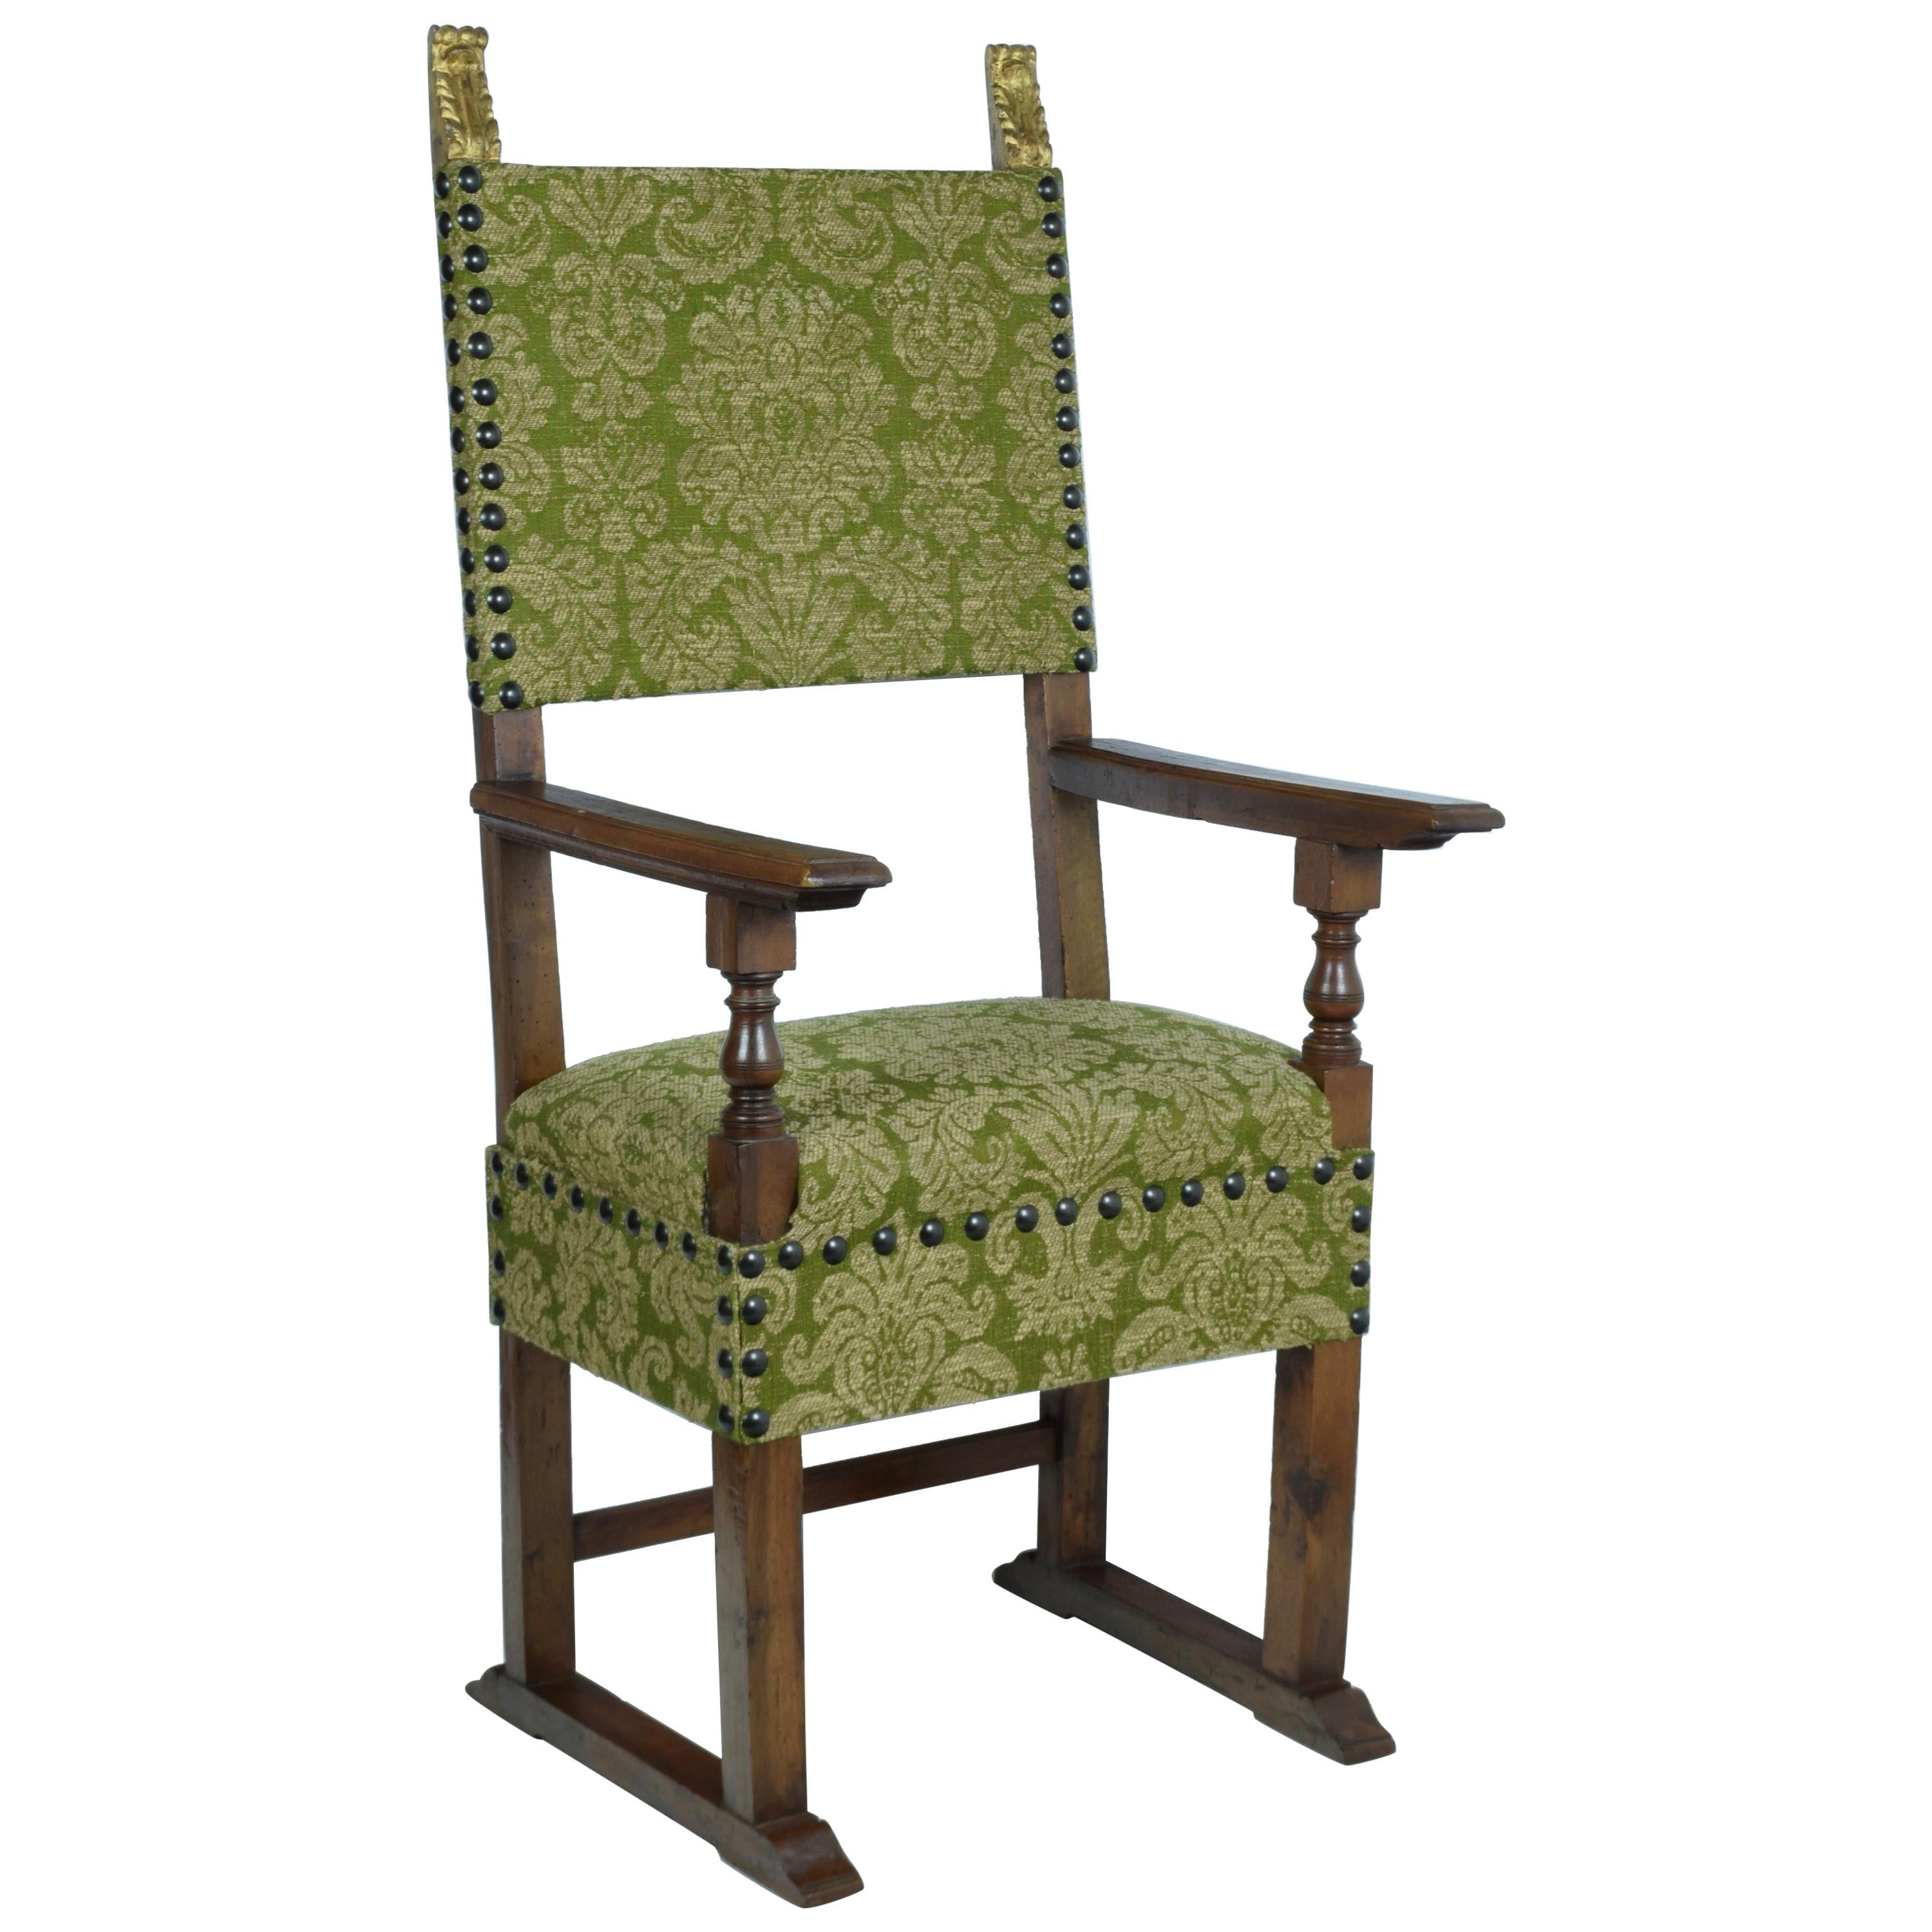 Italian Armchair in Carved Walnut Late 16th Century Covered in Green Damask For Sale